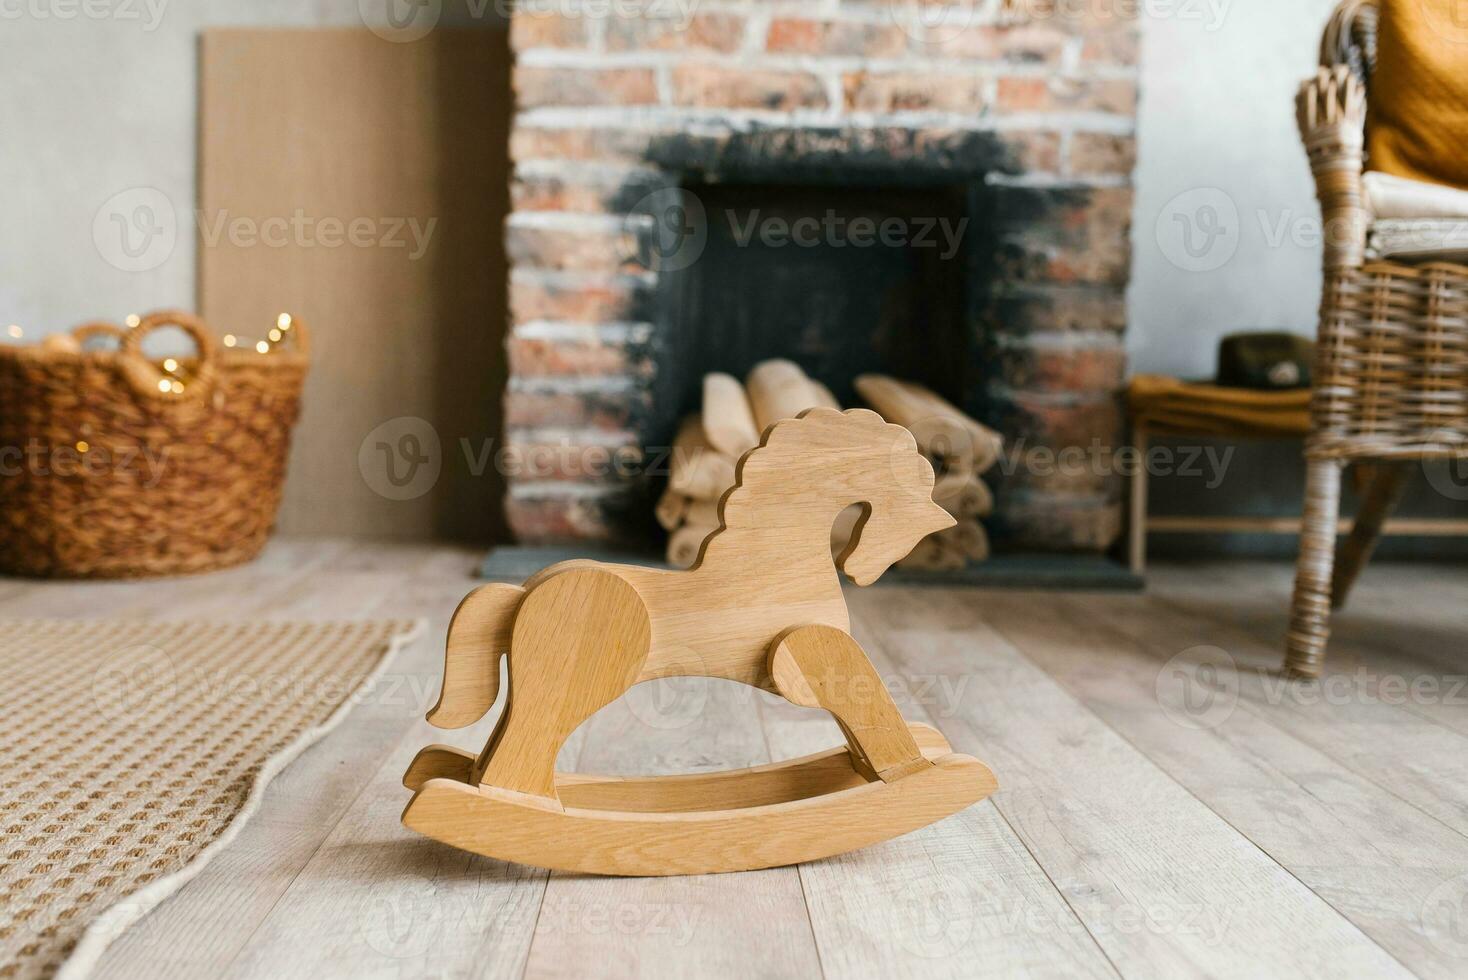 Brick fireplace with firewood, children's wooden toy horse-gurney in the living room in Scandinavian style photo